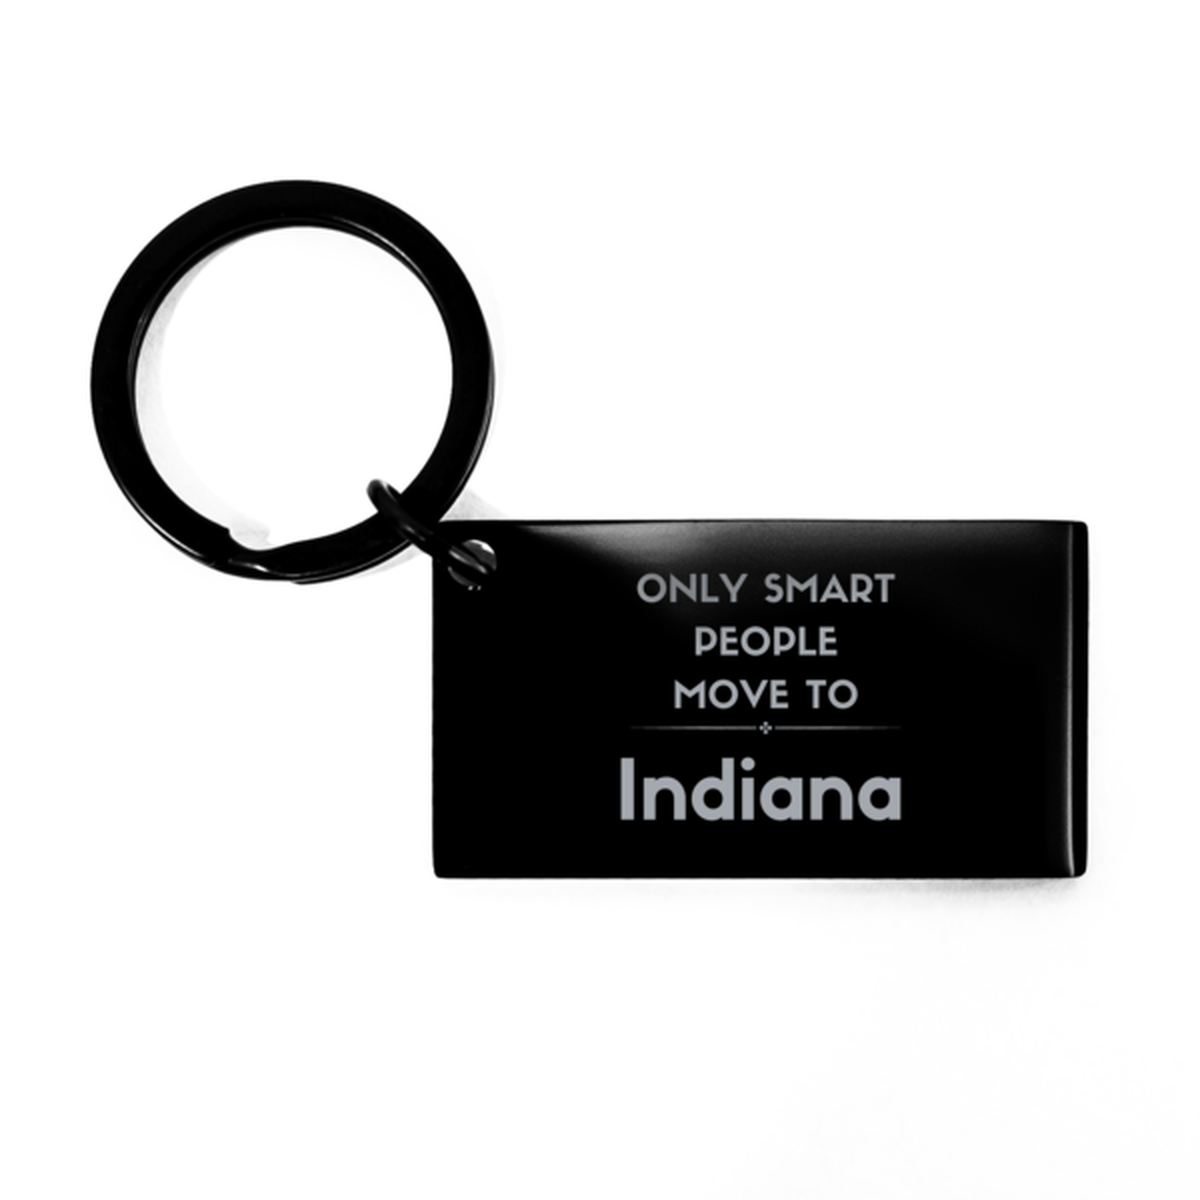 Only smart people move to Indiana Keychain, Gag Gifts For Indiana, Move to Indiana Gifts for Friends Coworker Funny Saying Quote